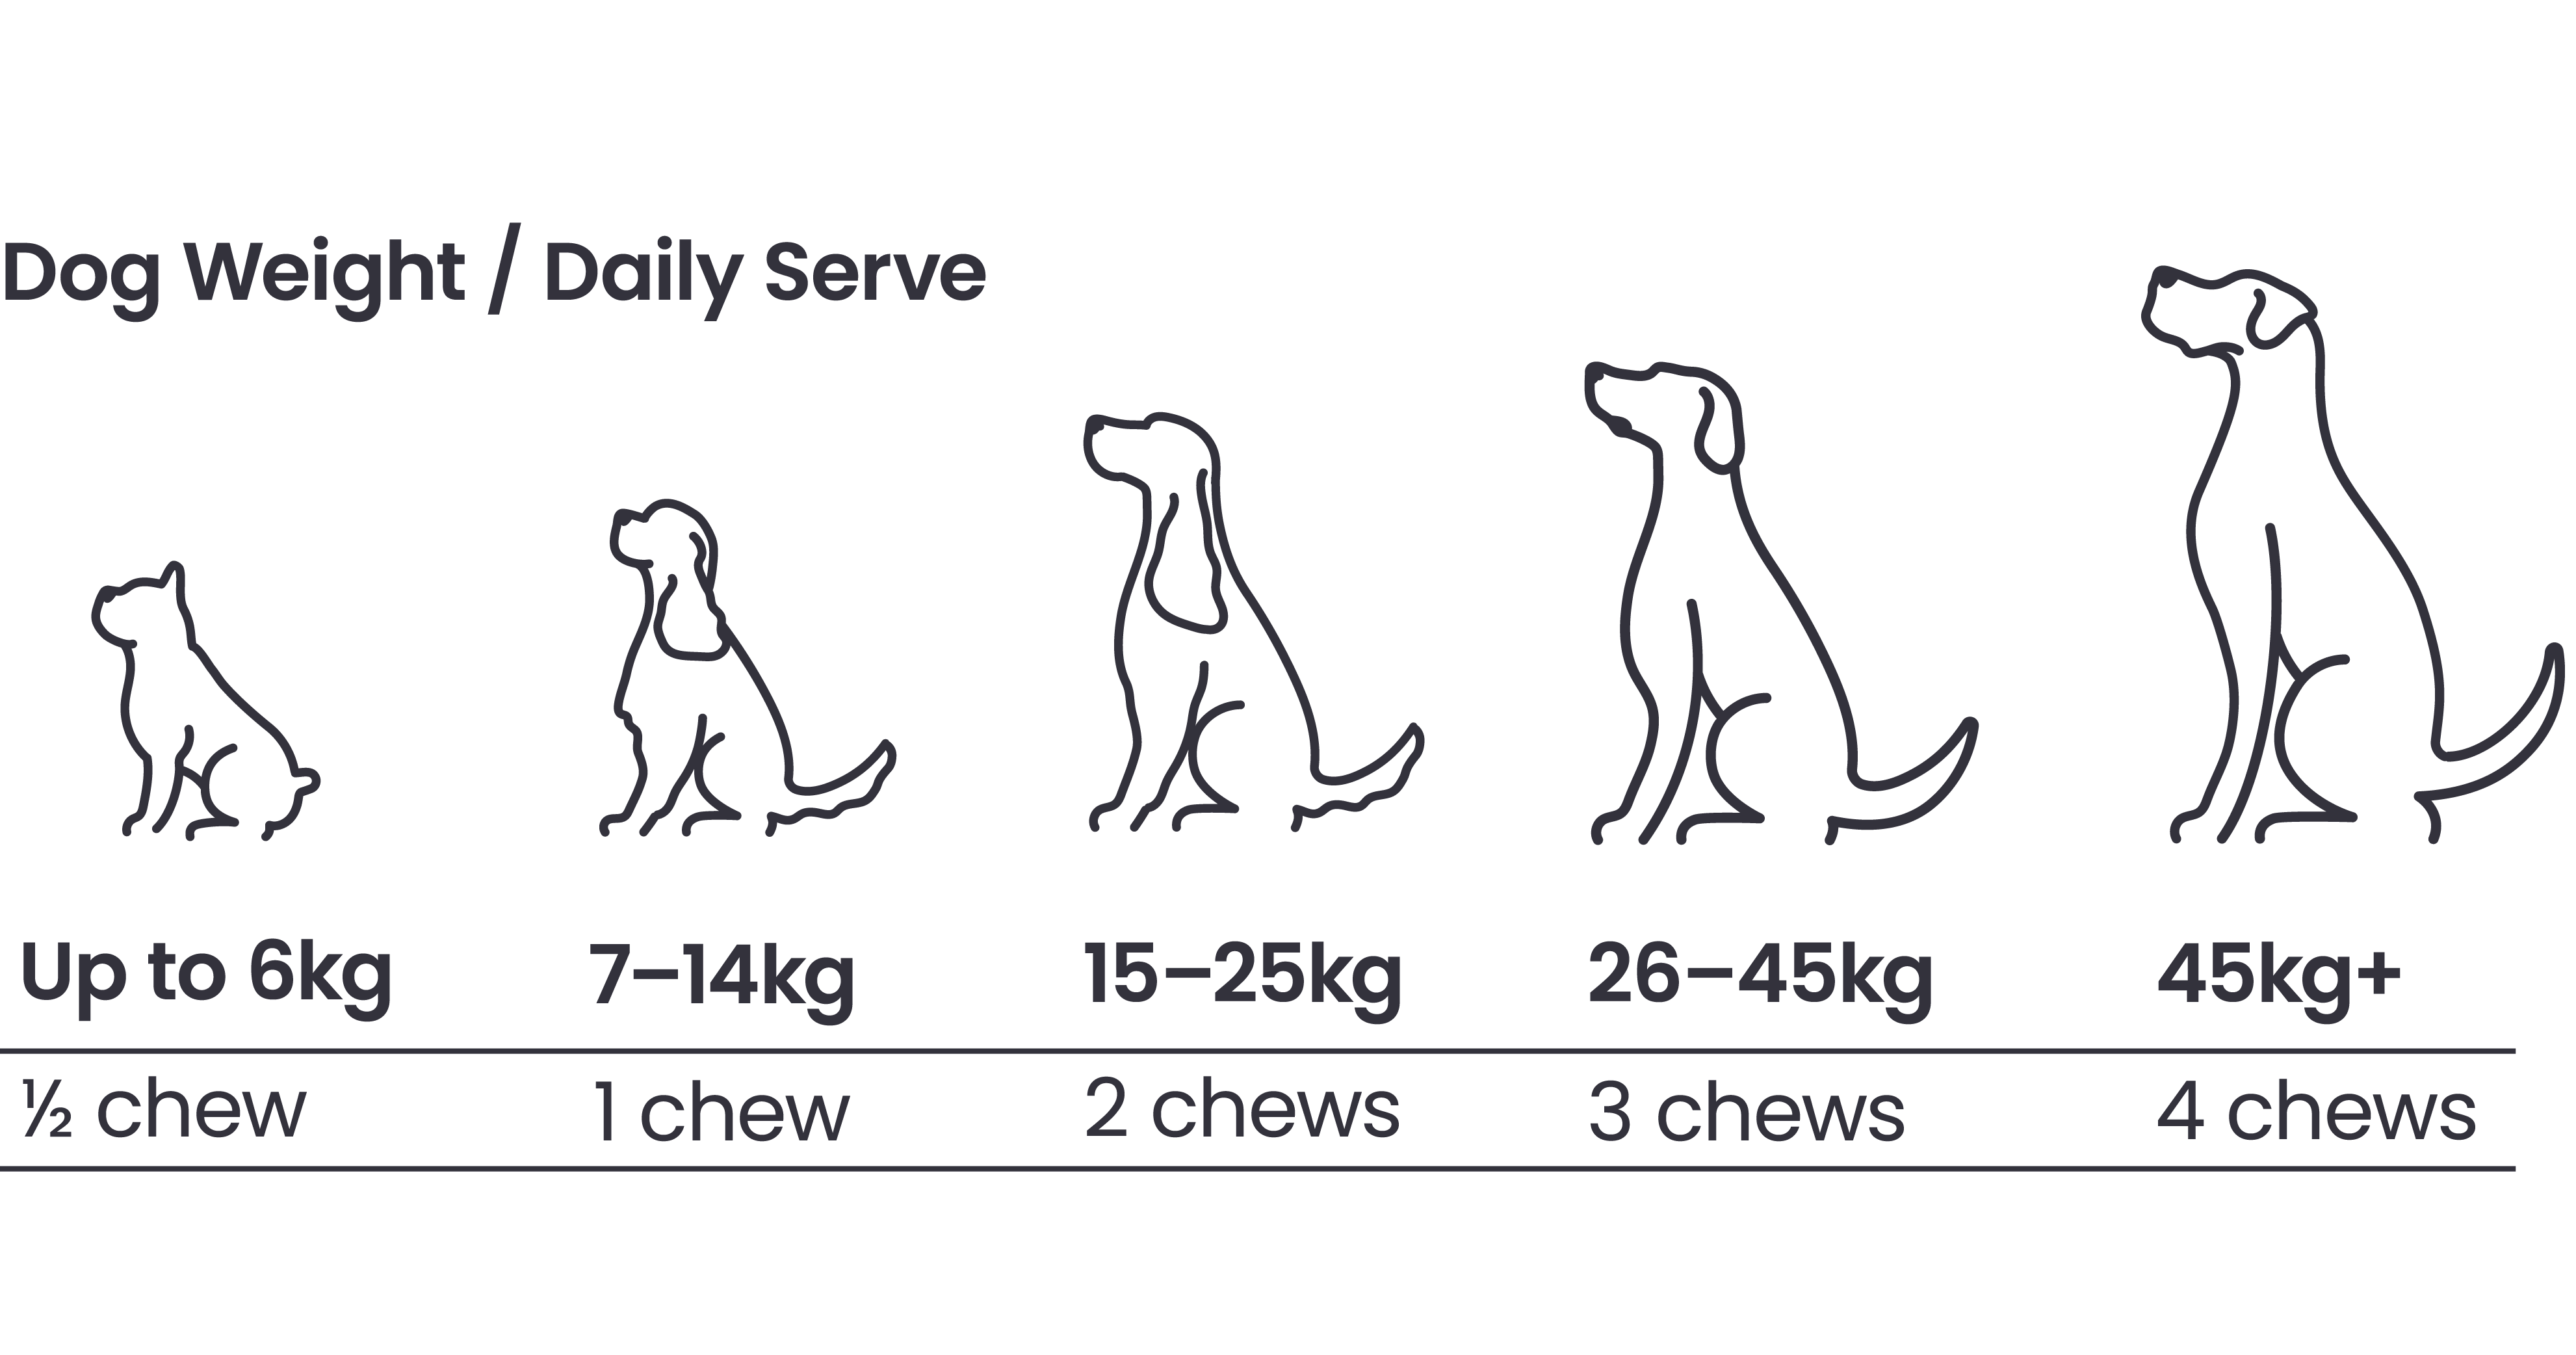 ZamiPet Relax &amp; Calm feeding guide. For dogs up to 6kg, 1/2 chew per day. For 7-14kg dogs, 1 chew per day. For 15-25kg dogs, 2 chews per day. For 26-45kg dogs, 3 chews per day. For dogs 45kg and over, 4 chews per day. 